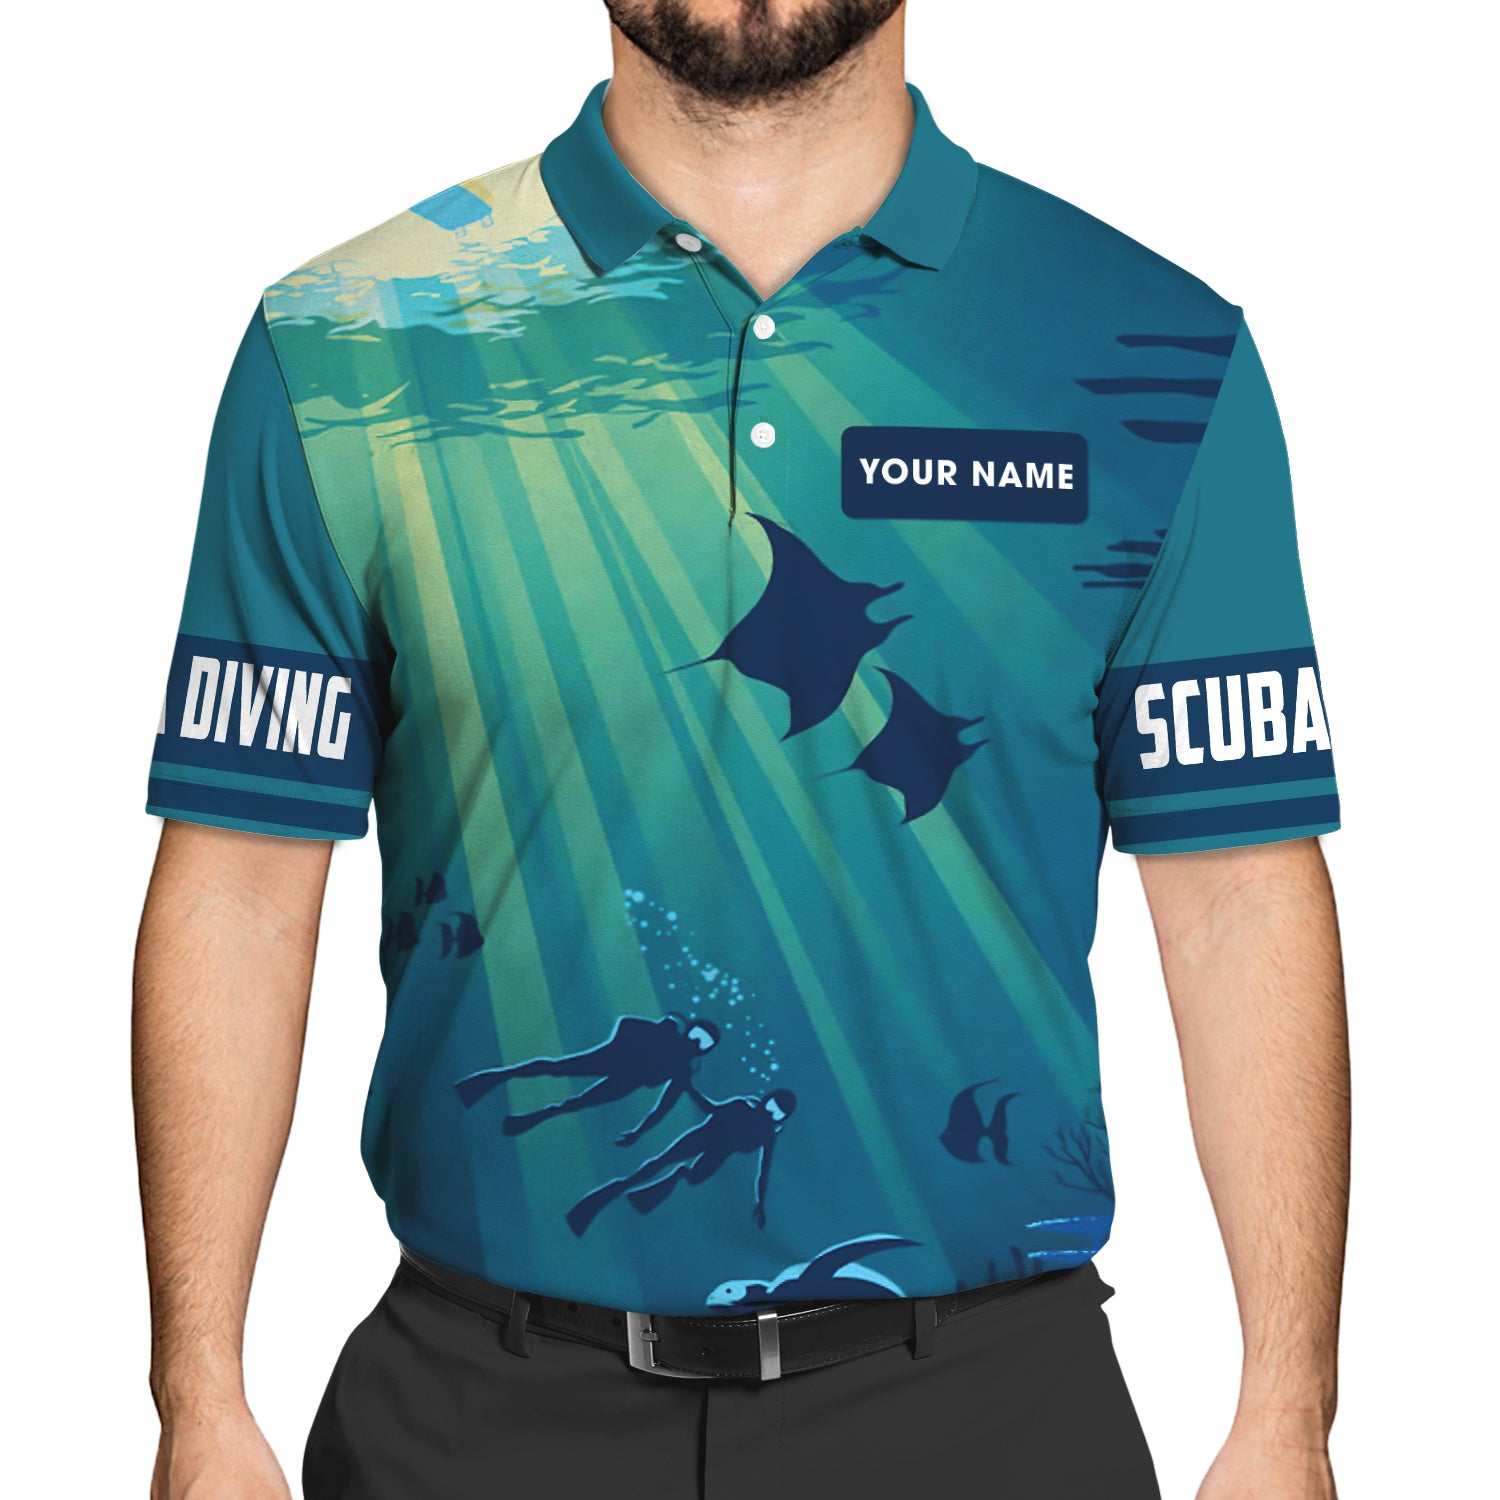 Scuba Diving 13 - Personalized Name 3D Polo Shirt - Bhn97